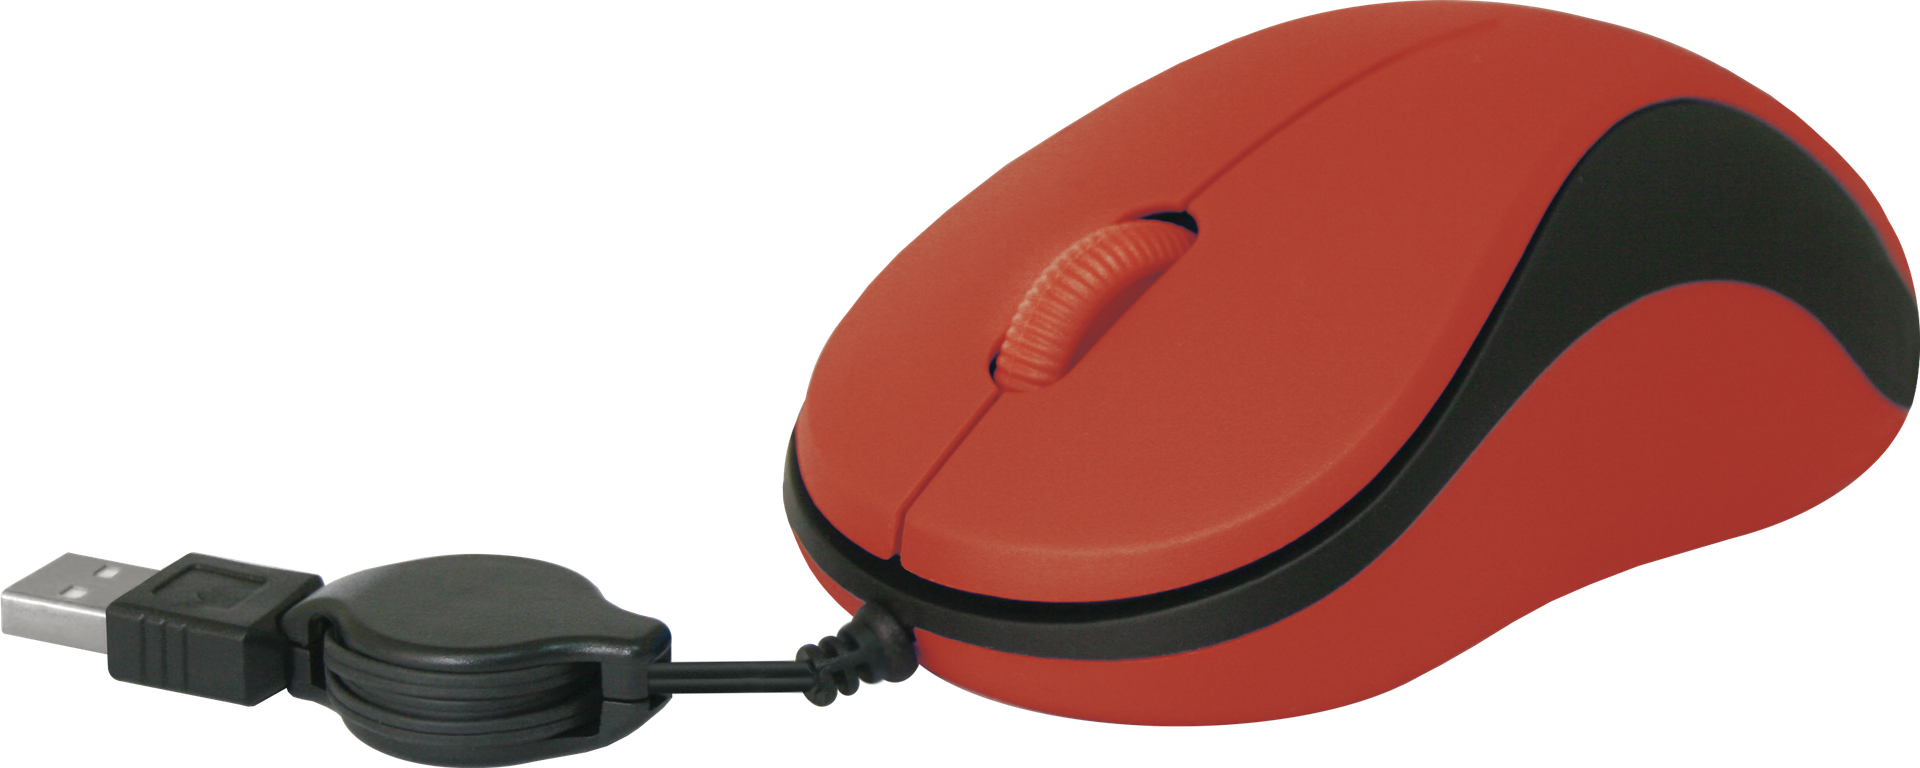 mice clipart optical mouse